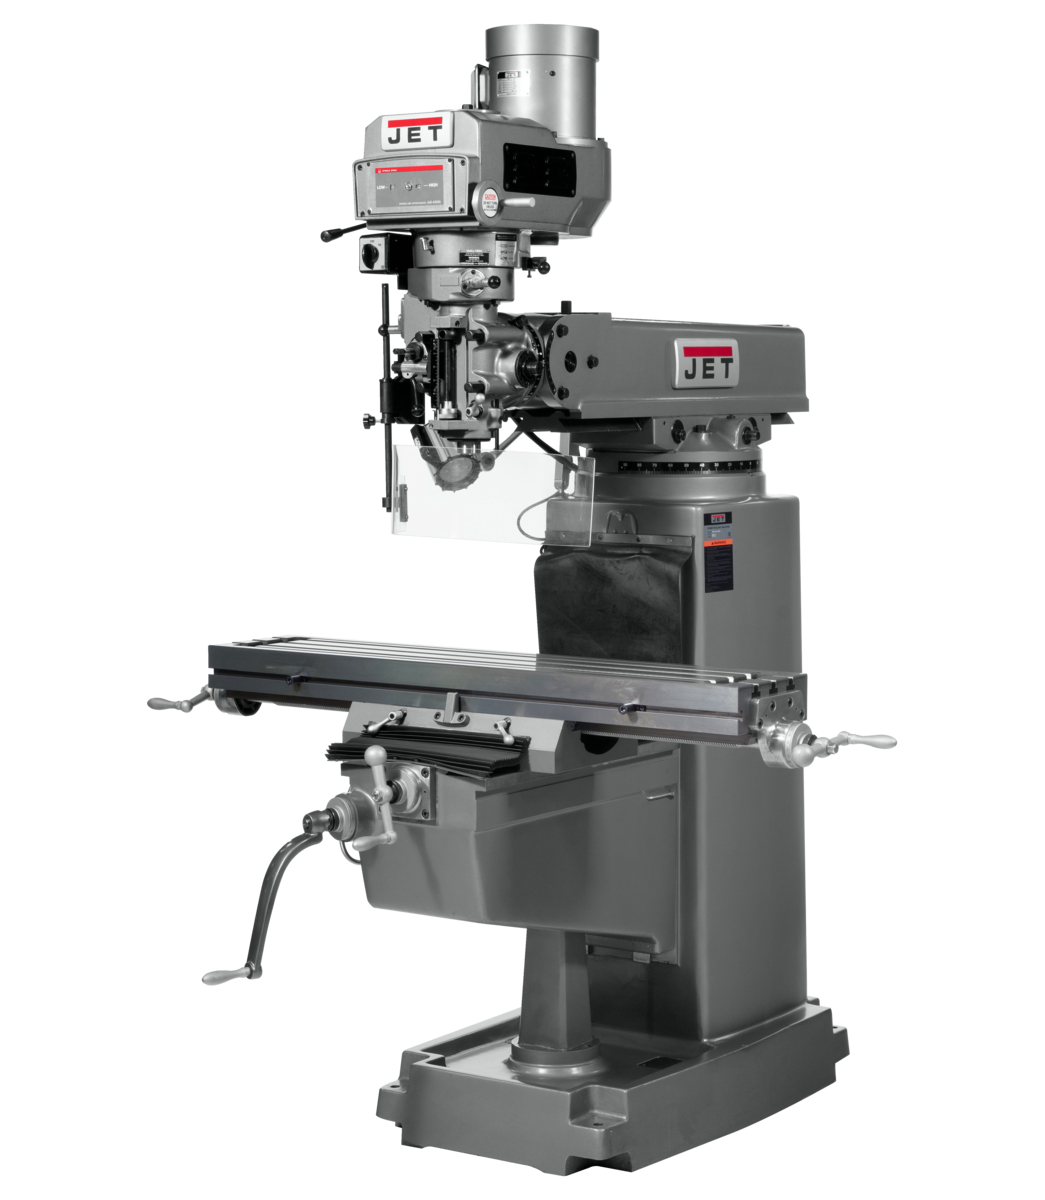 JTM-1050VS2 Mill With ACU-RITE 203 DRO With X-Axis Powerfeed